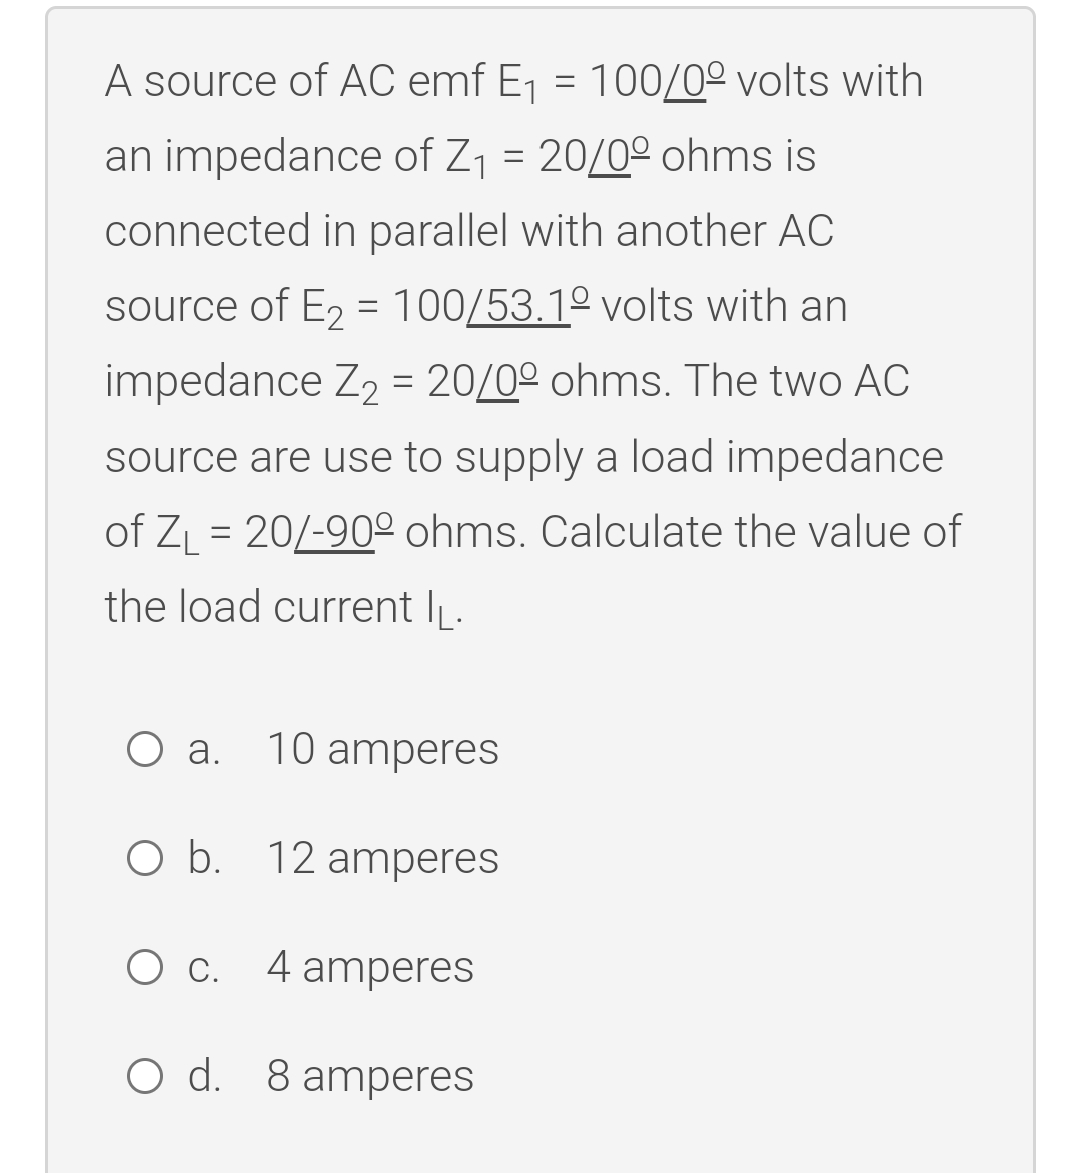 A source of AC emf E₁ = 100/00 volts with
an impedance of Z₁ = 20/0° ohms is
connected in parallel with another AC
source of E₂ = 100/53.1º volts with an
impedance Z₂ = 20/0° ohms. The two AC
source are use to supply a load impedance
of Z₁ = 20/-900 ohms. Calculate the value of
the load current IL.
O a.
10 amperes
O b. 12 amperes
O C. 4 amperes
O d. 8 amperes